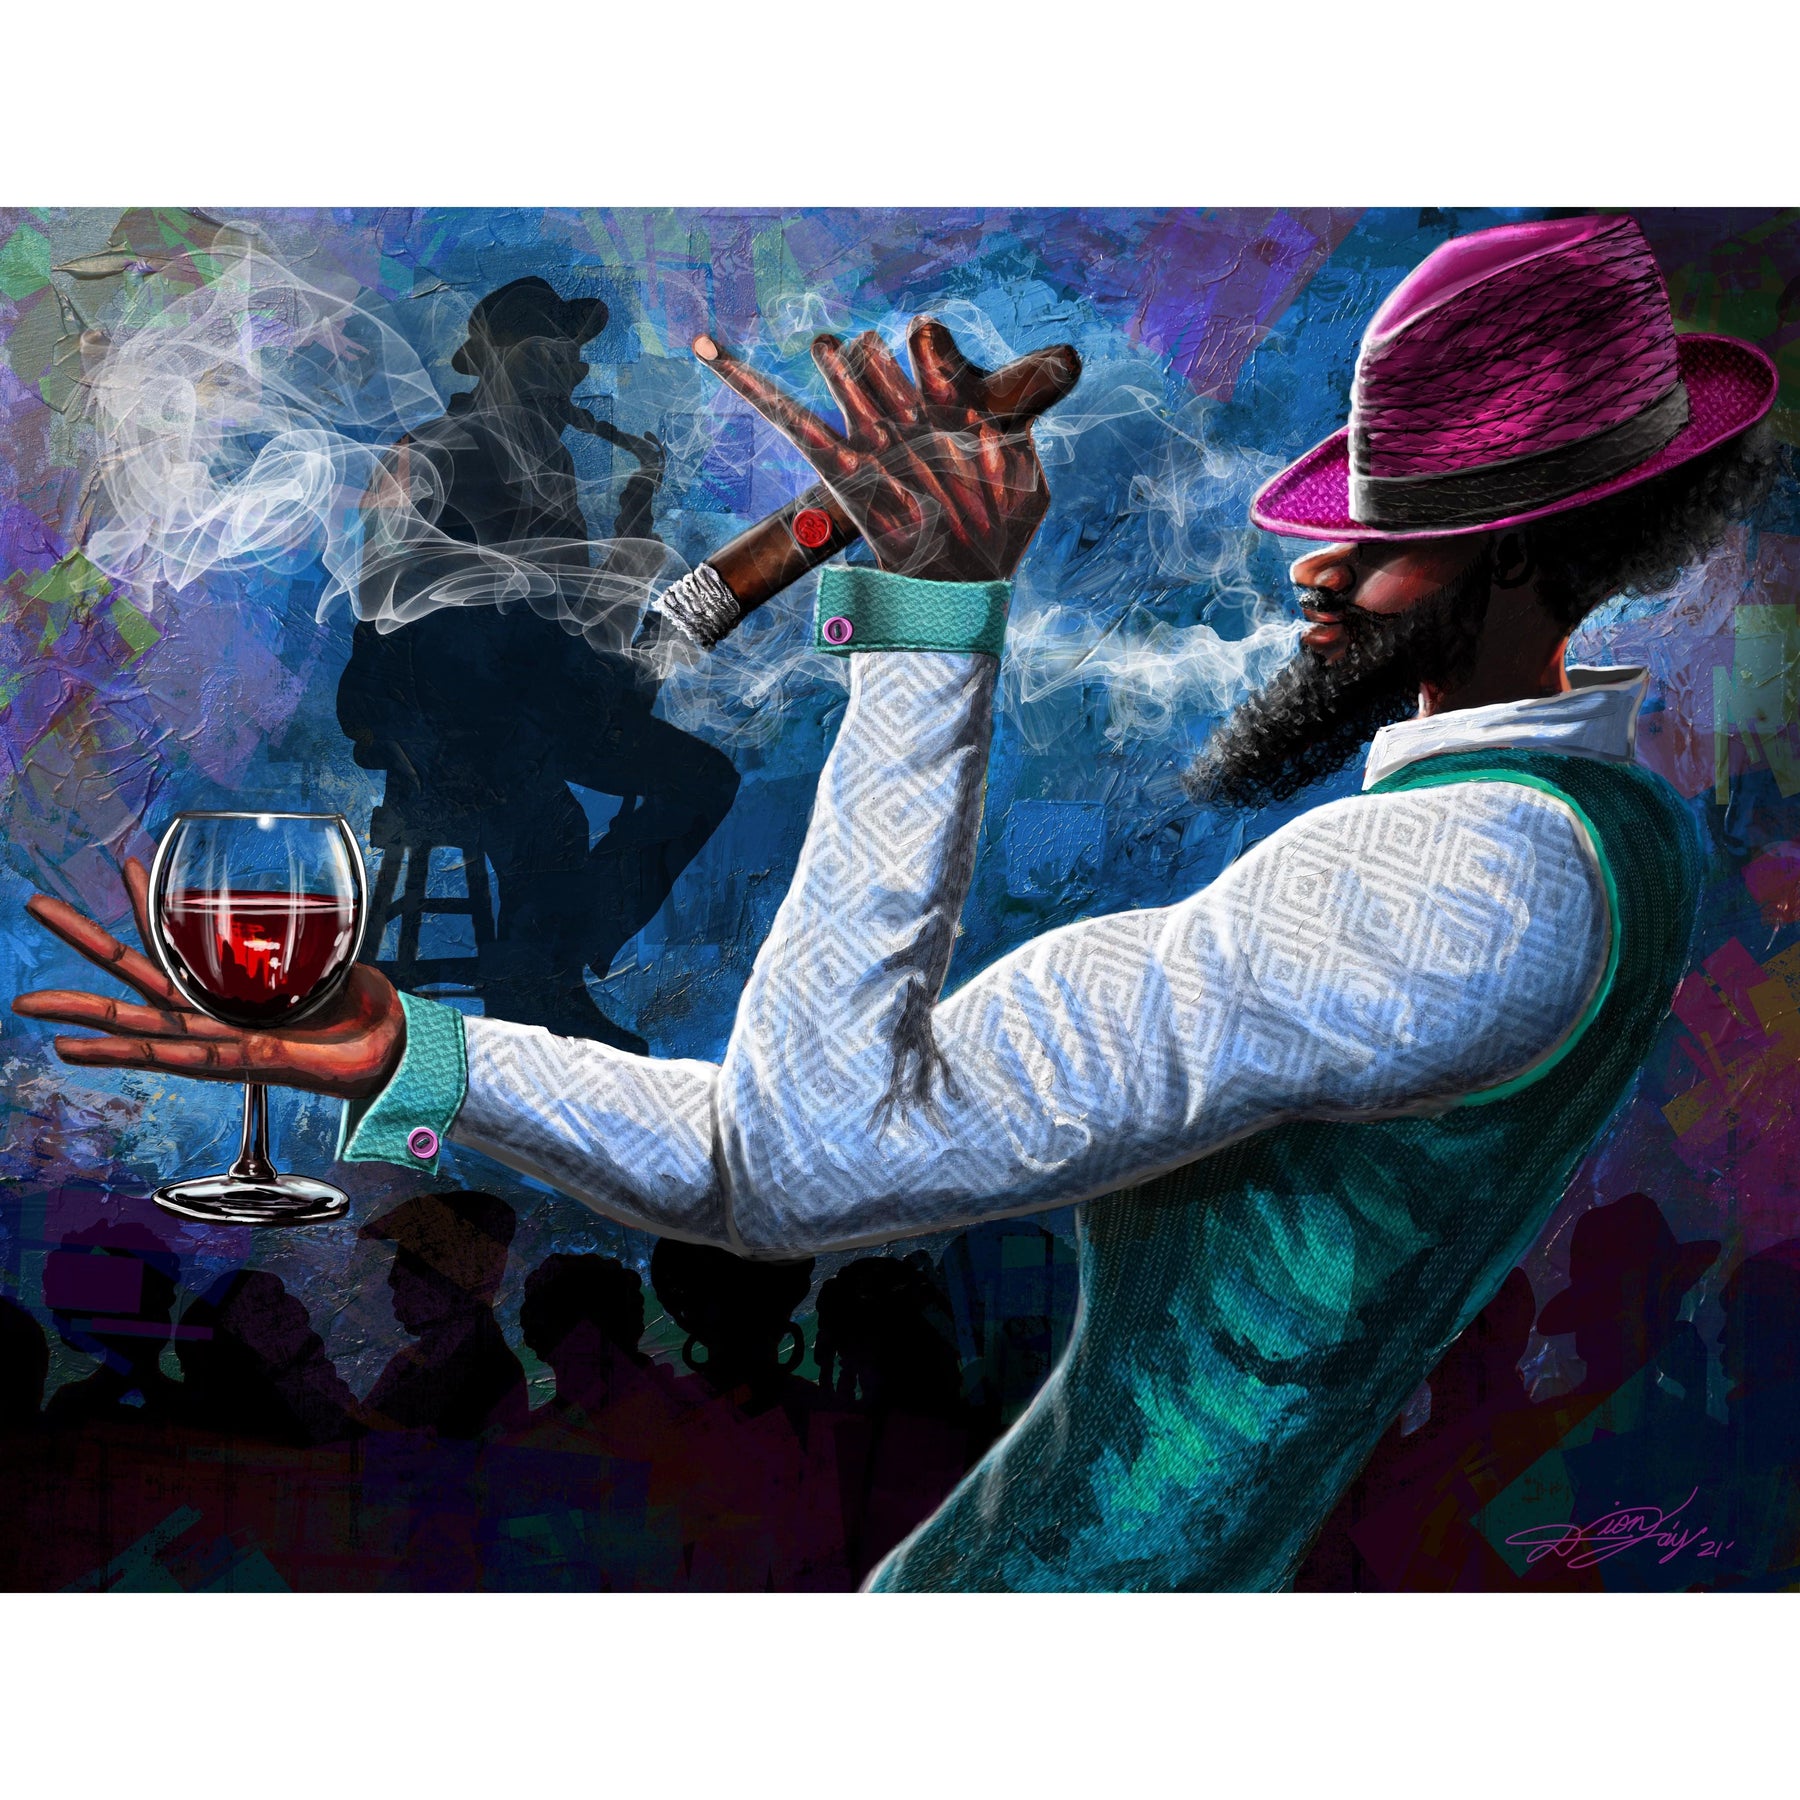 1 of 2: Cigars and Brandy by Dion Pollard